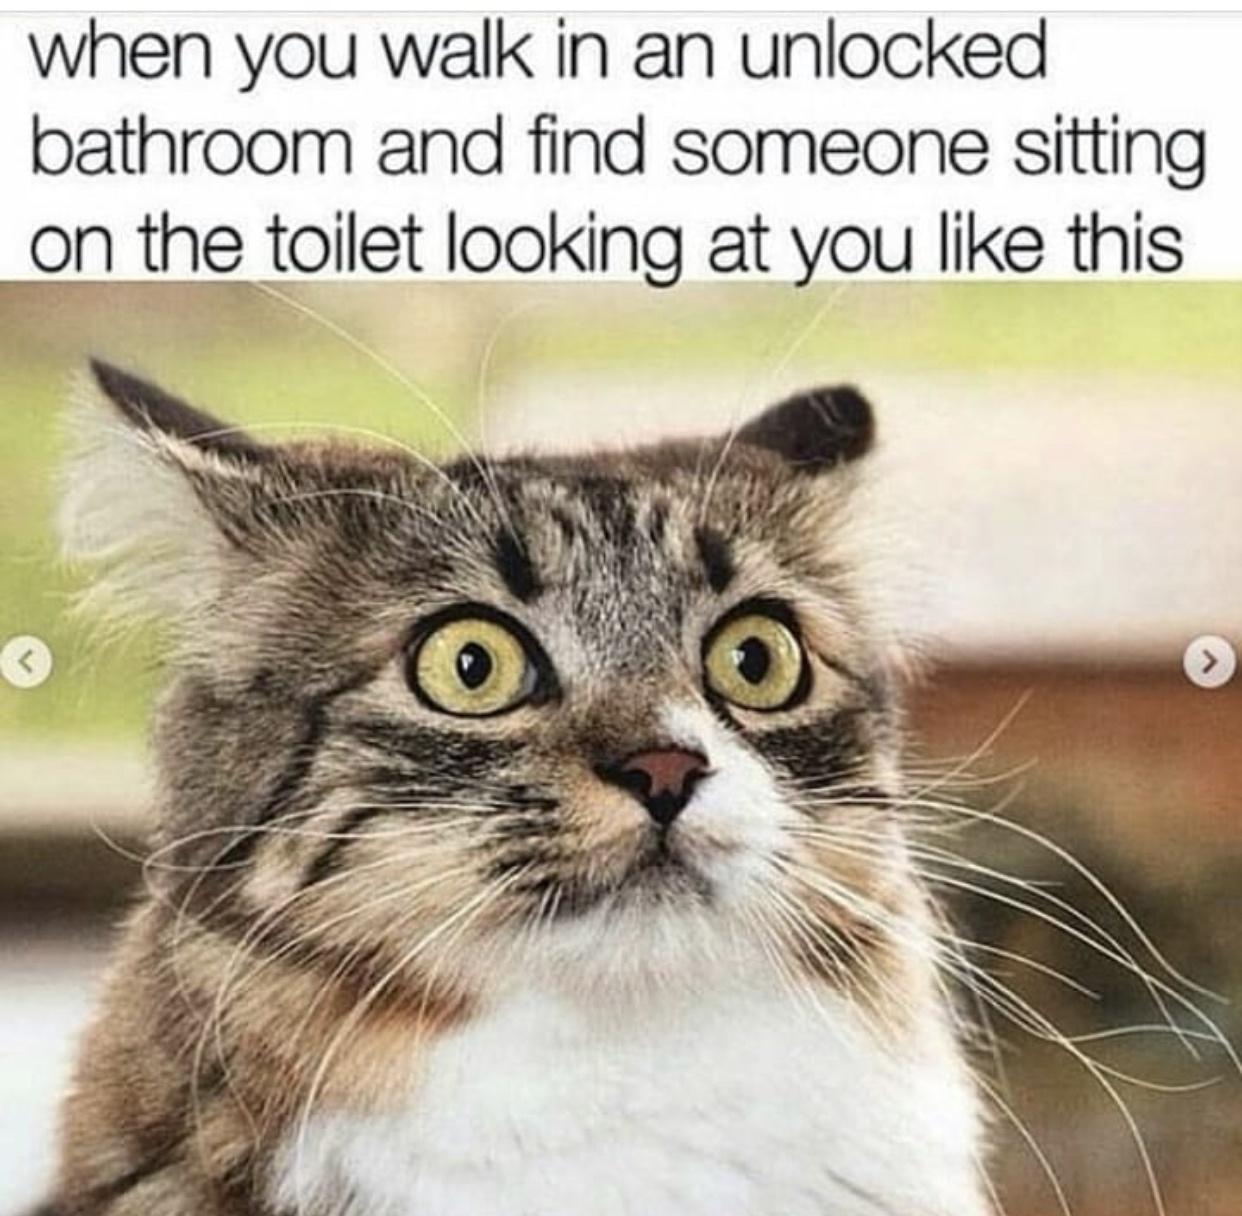 animal night time memes - when you walk in an unlocked bathroom and find someone sitting on the toilet looking at you this